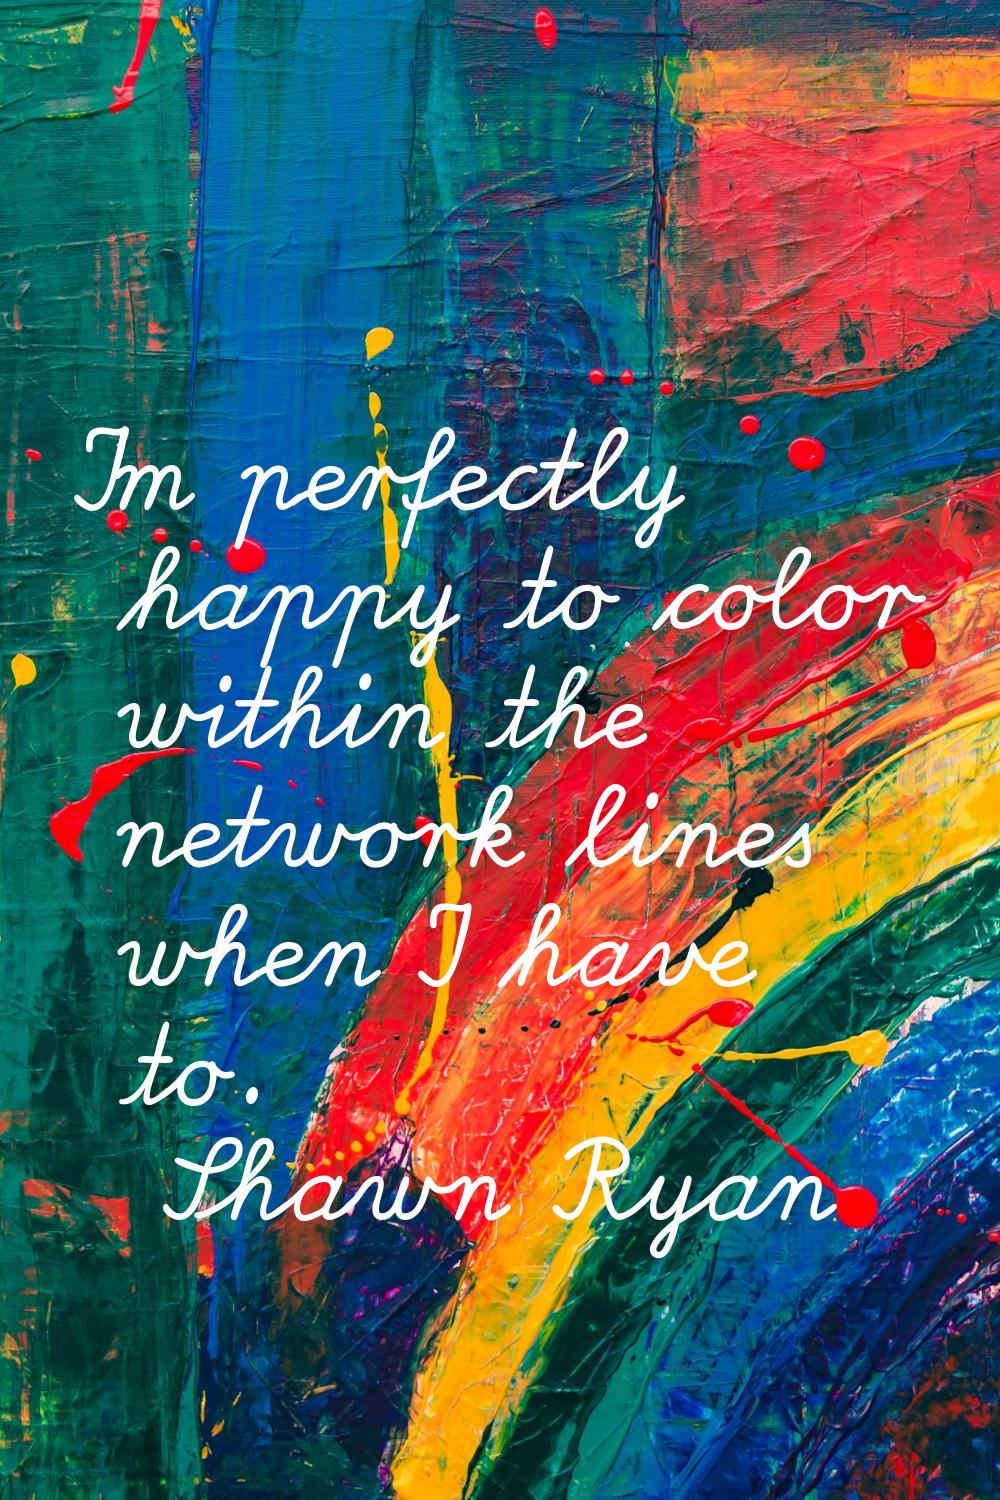 I'm perfectly happy to color within the network lines when I have to.